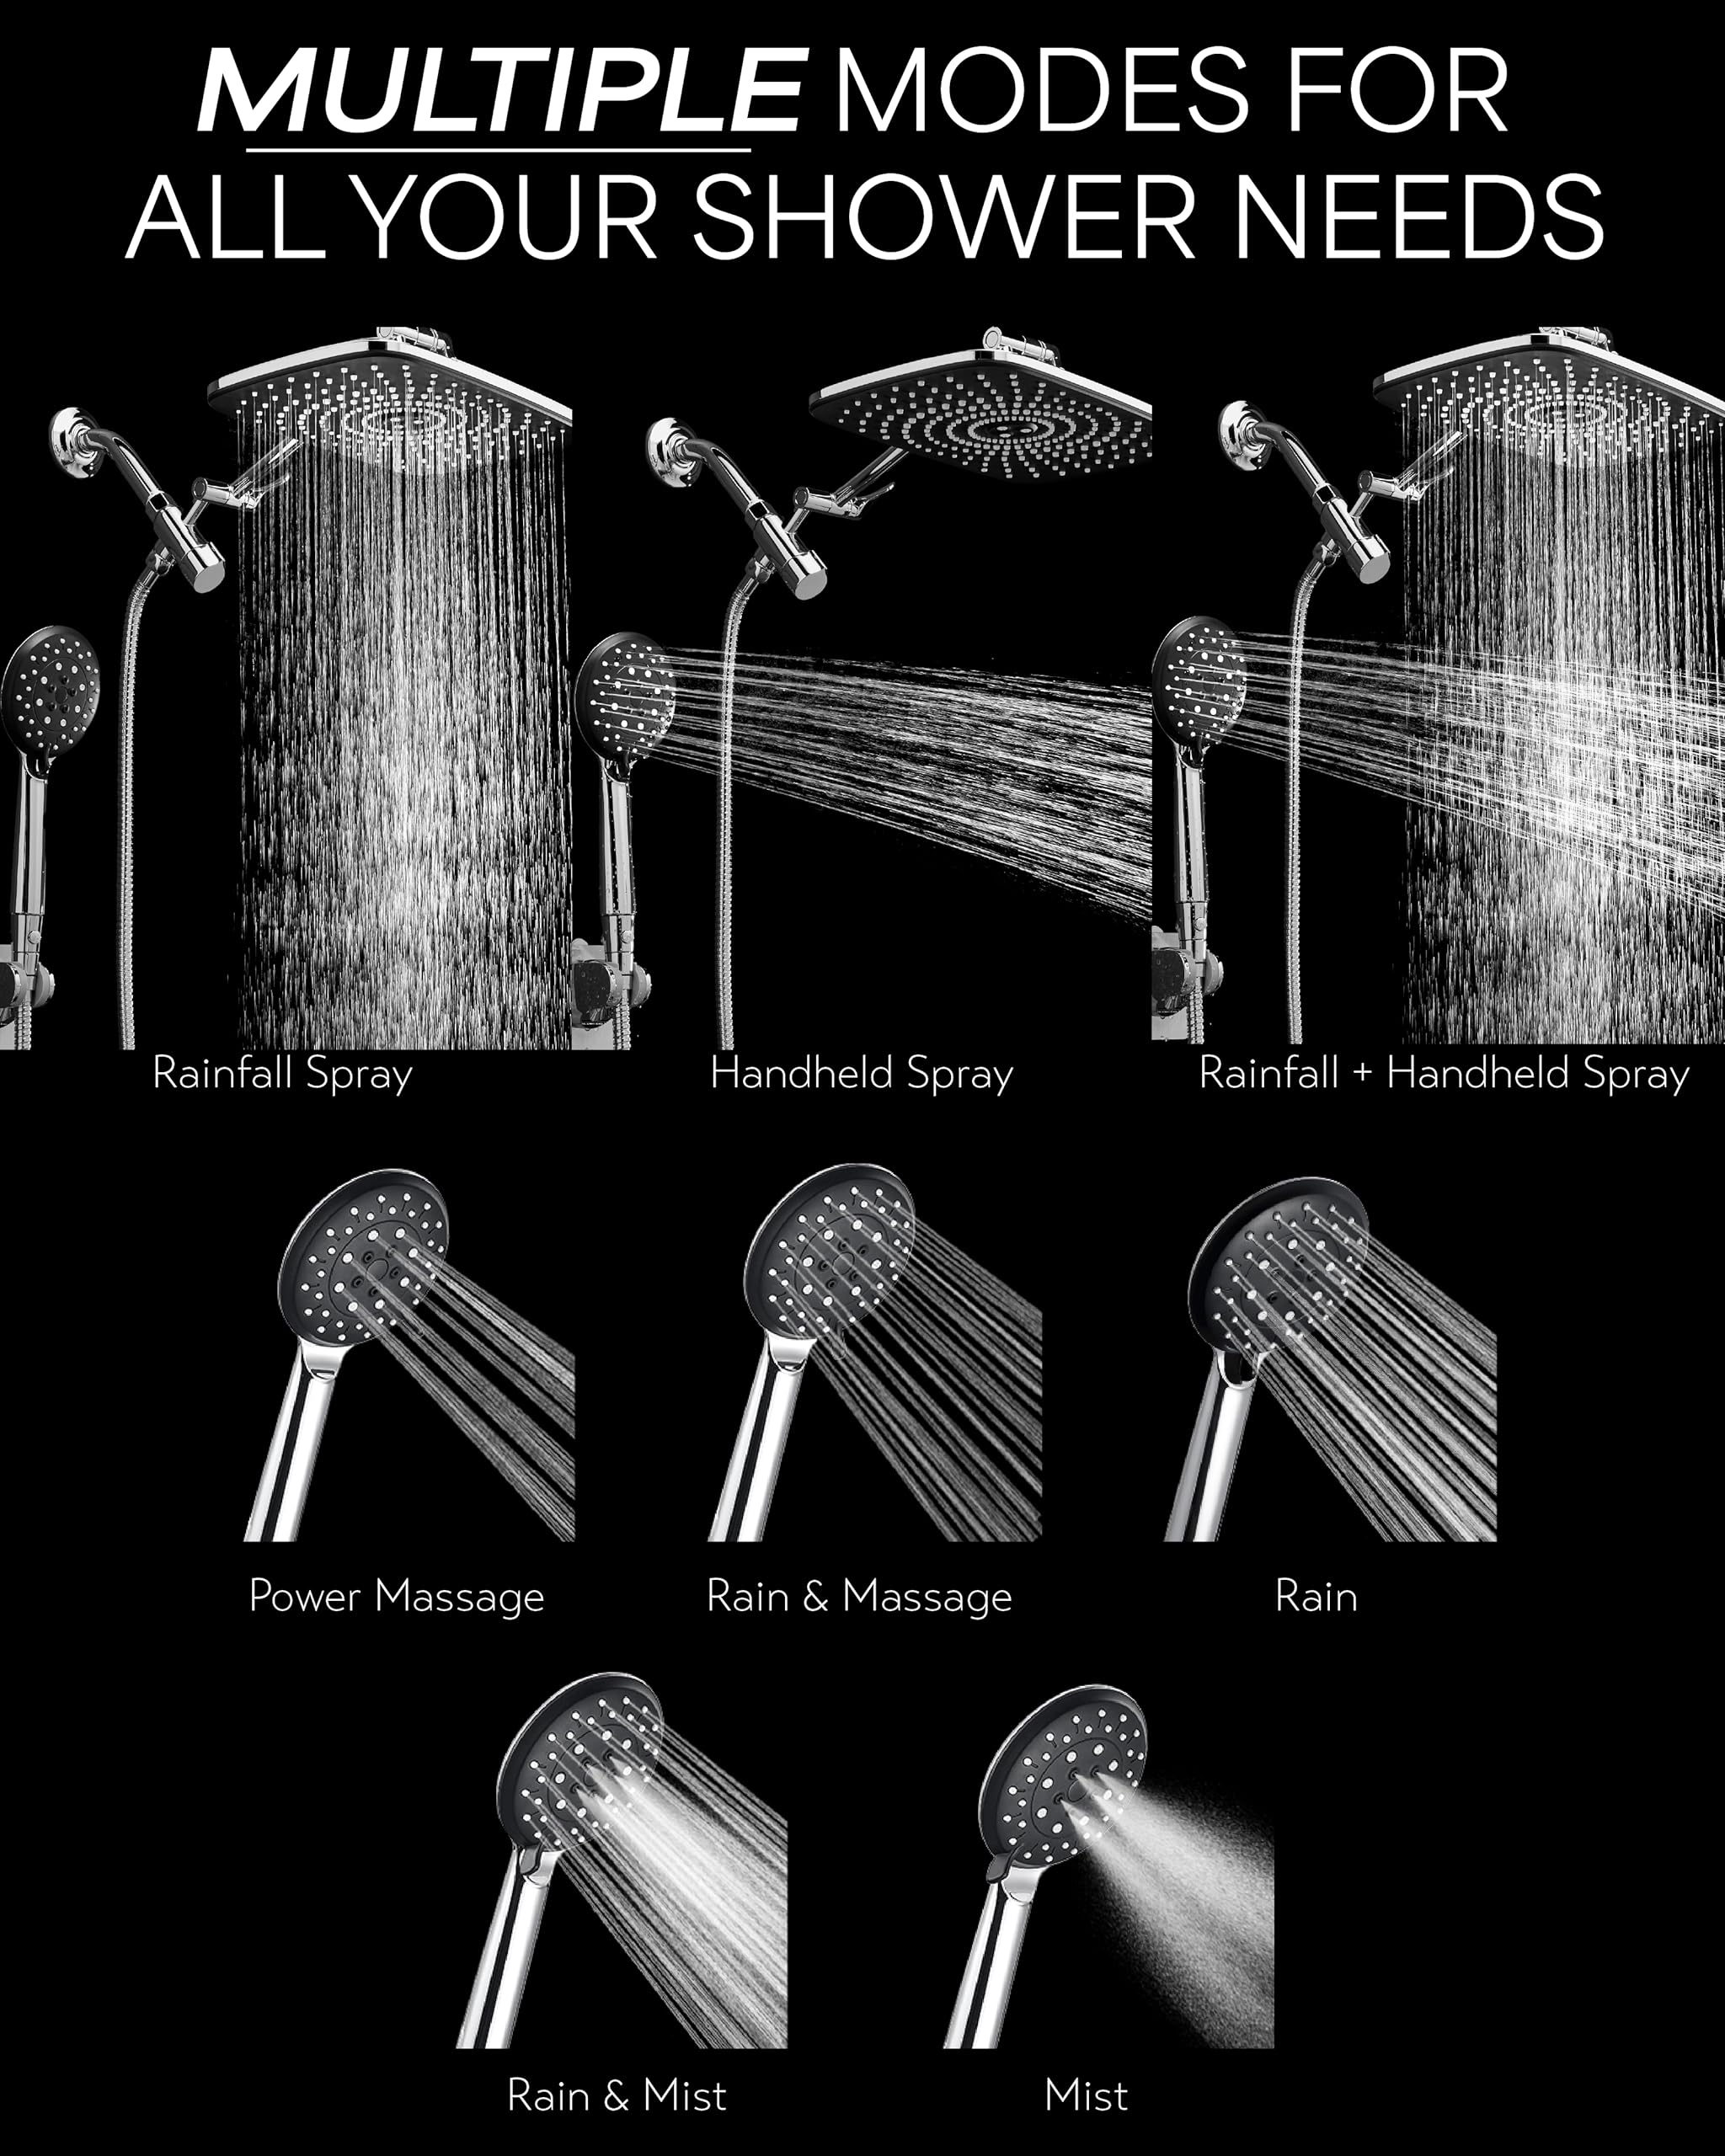 Veken 12 Inch High Pressure Rain Shower Head Combo with Extension Arm- Wide Rainfall Showerhead with 5 Handheld Water Spray - Adjustable Dual Showerhead with Anti-Clog Nozzles - Silver Chrome